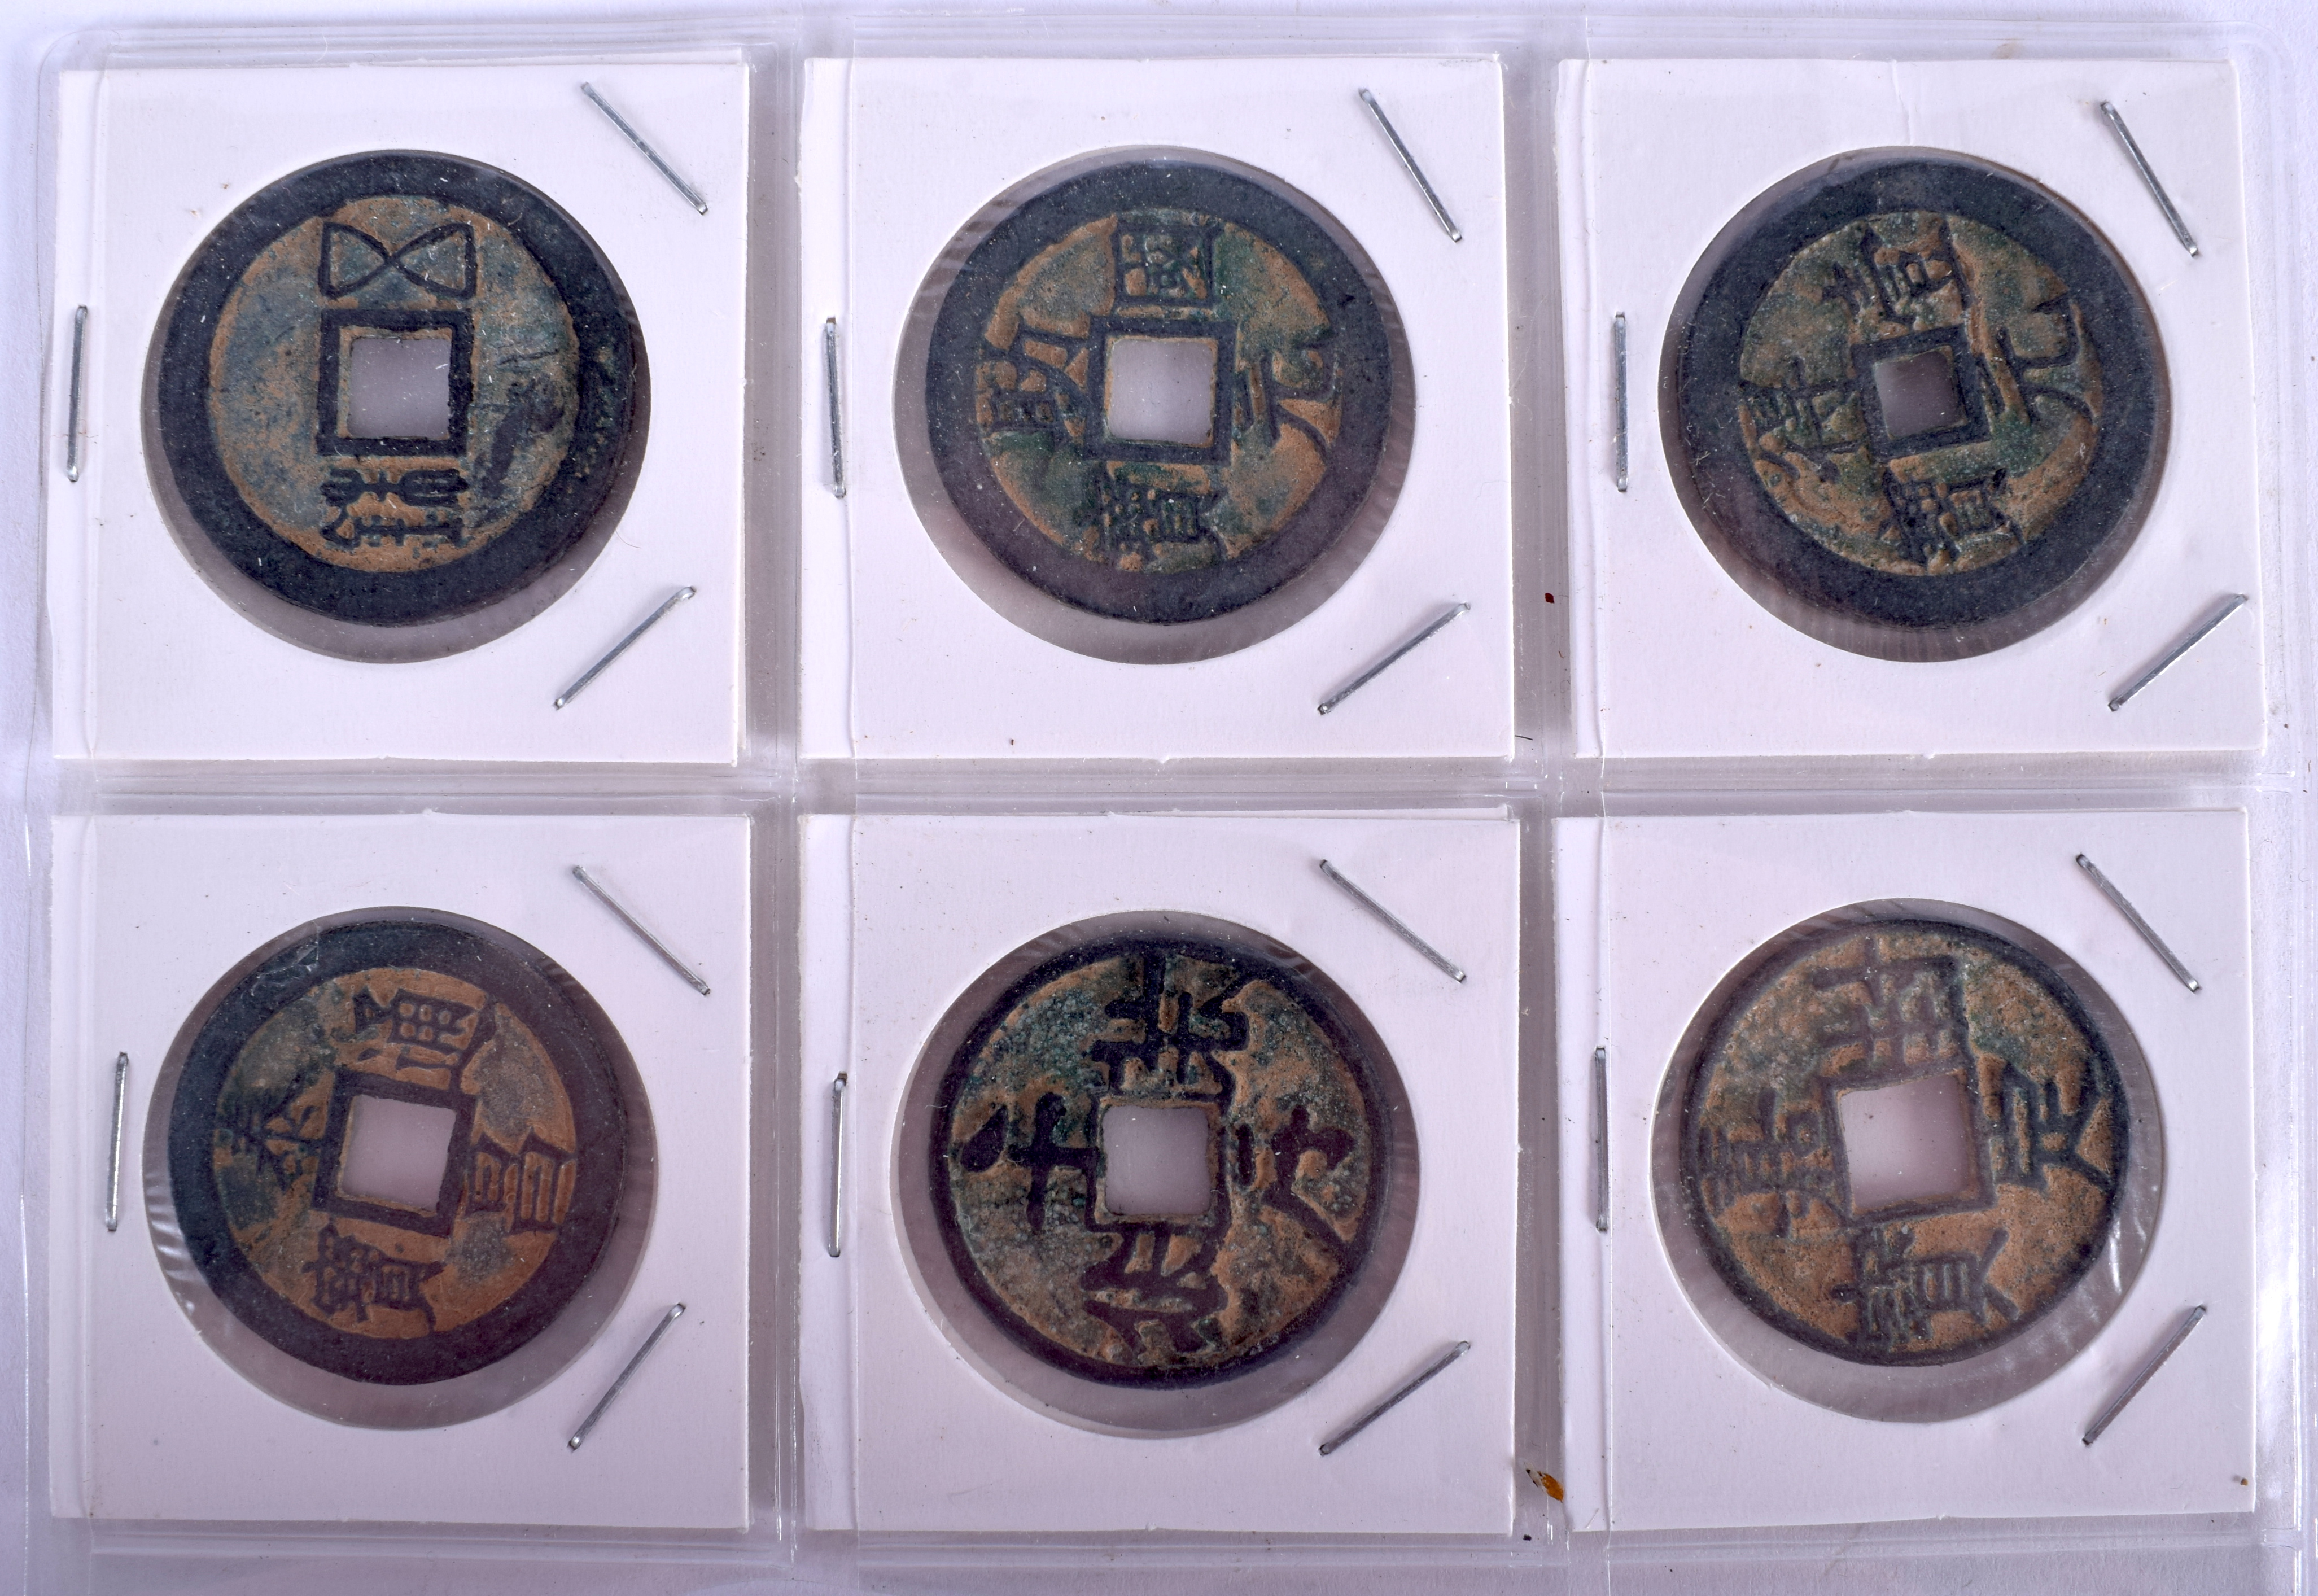 SIX CHINESE COINS 20th Century. (6) - Image 2 of 2